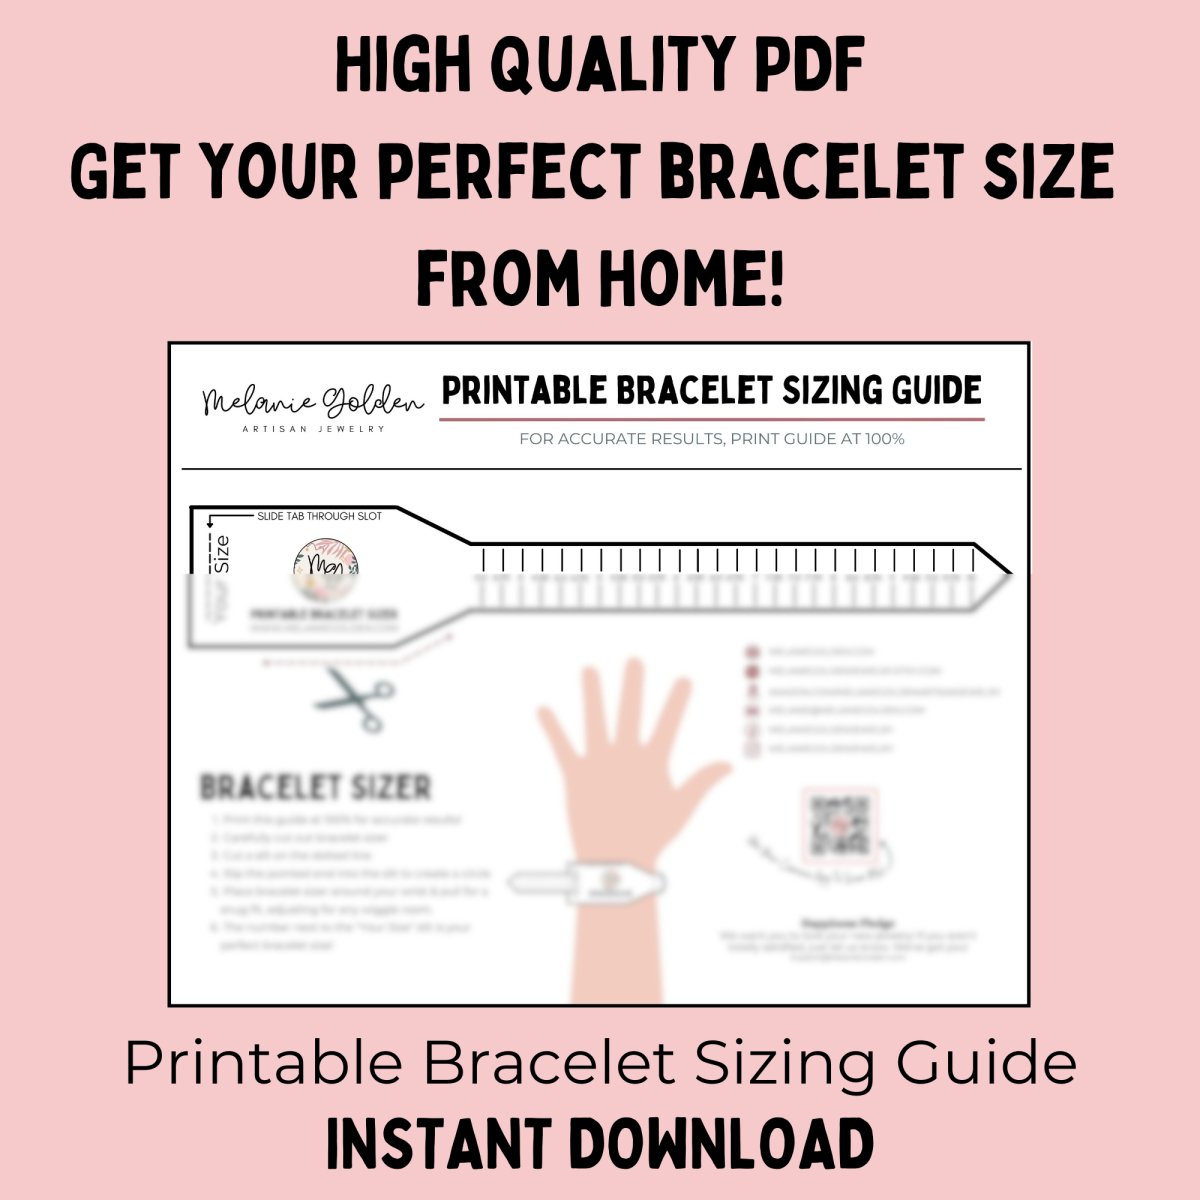 Printable Bracelet Sizer - Melanie Golden Jewelry - Digital Download - Find Your Perfect Fit